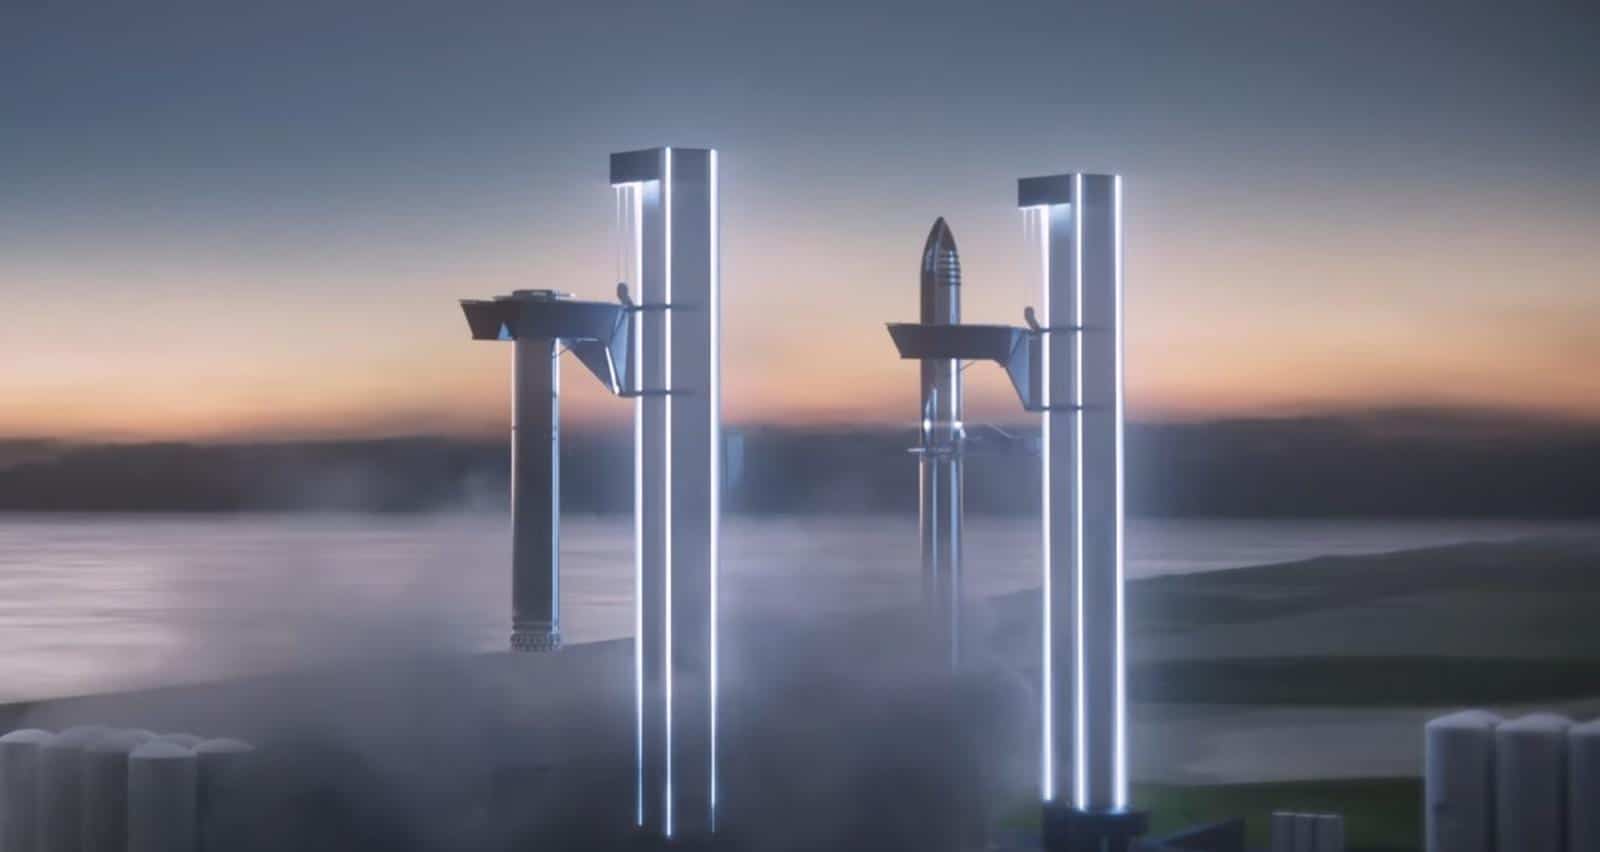 Virtual launch of Spaceship from SpaceX - watch the vision of conquering Mars on the new material